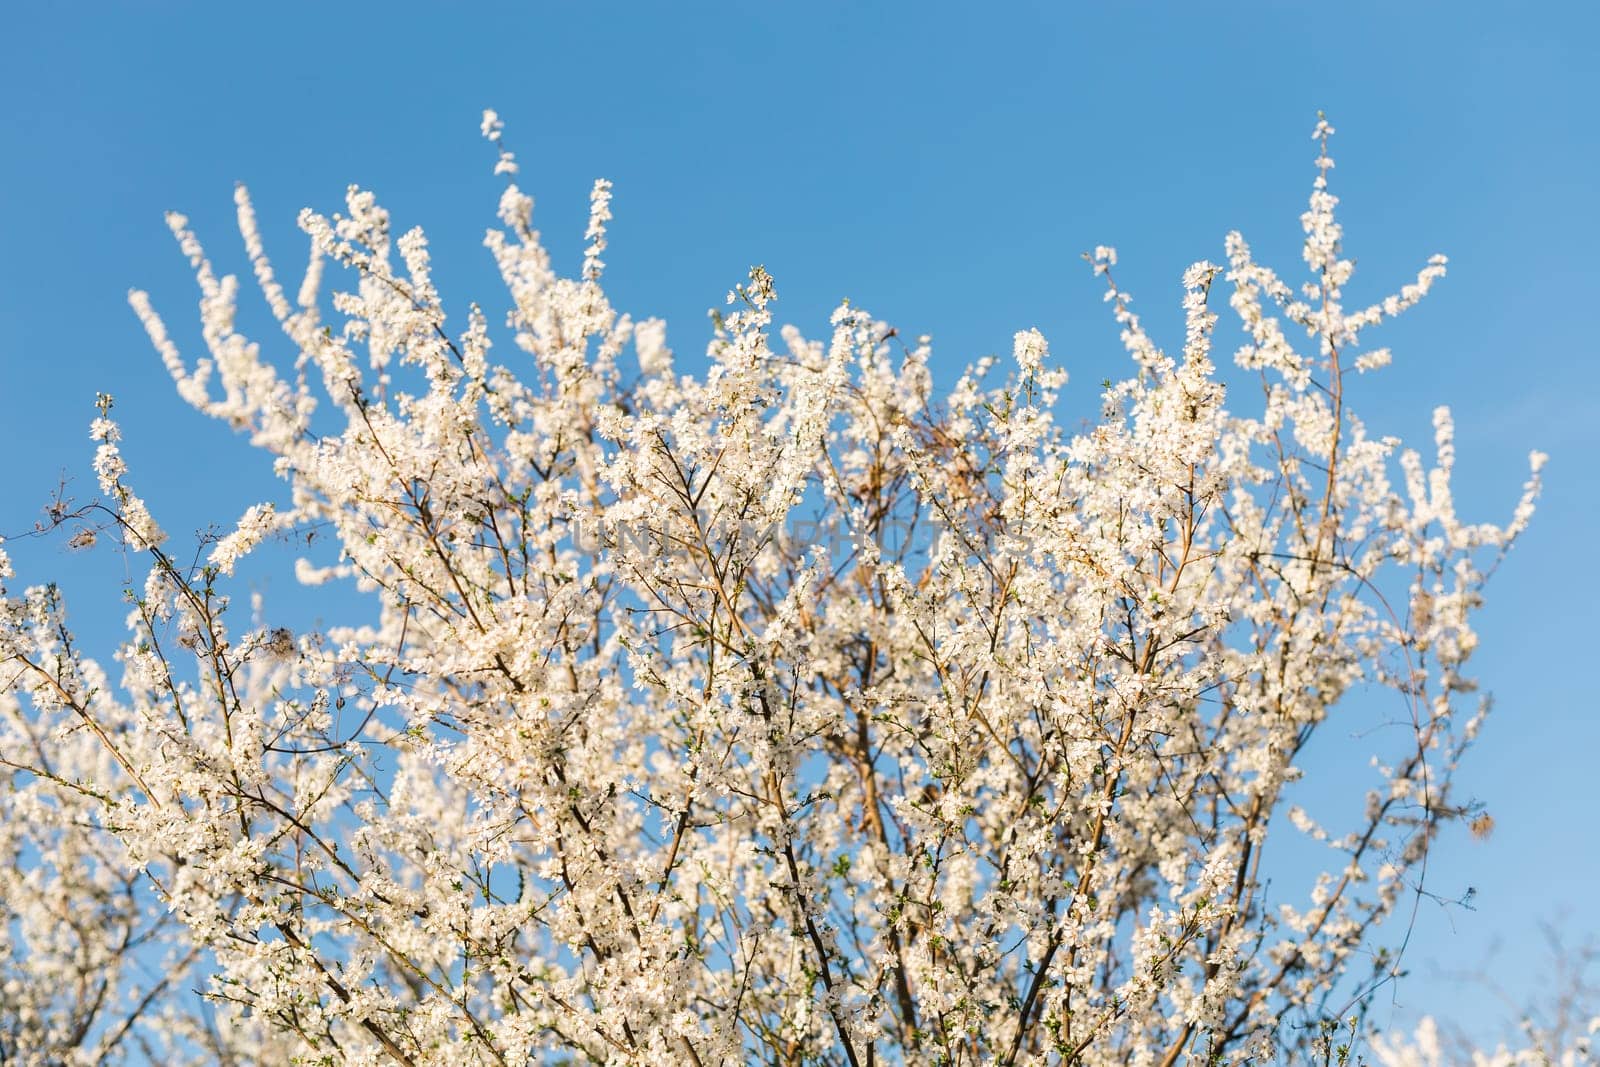 Cherry and apple blooming garden against clear blue sky. Spring flowering.